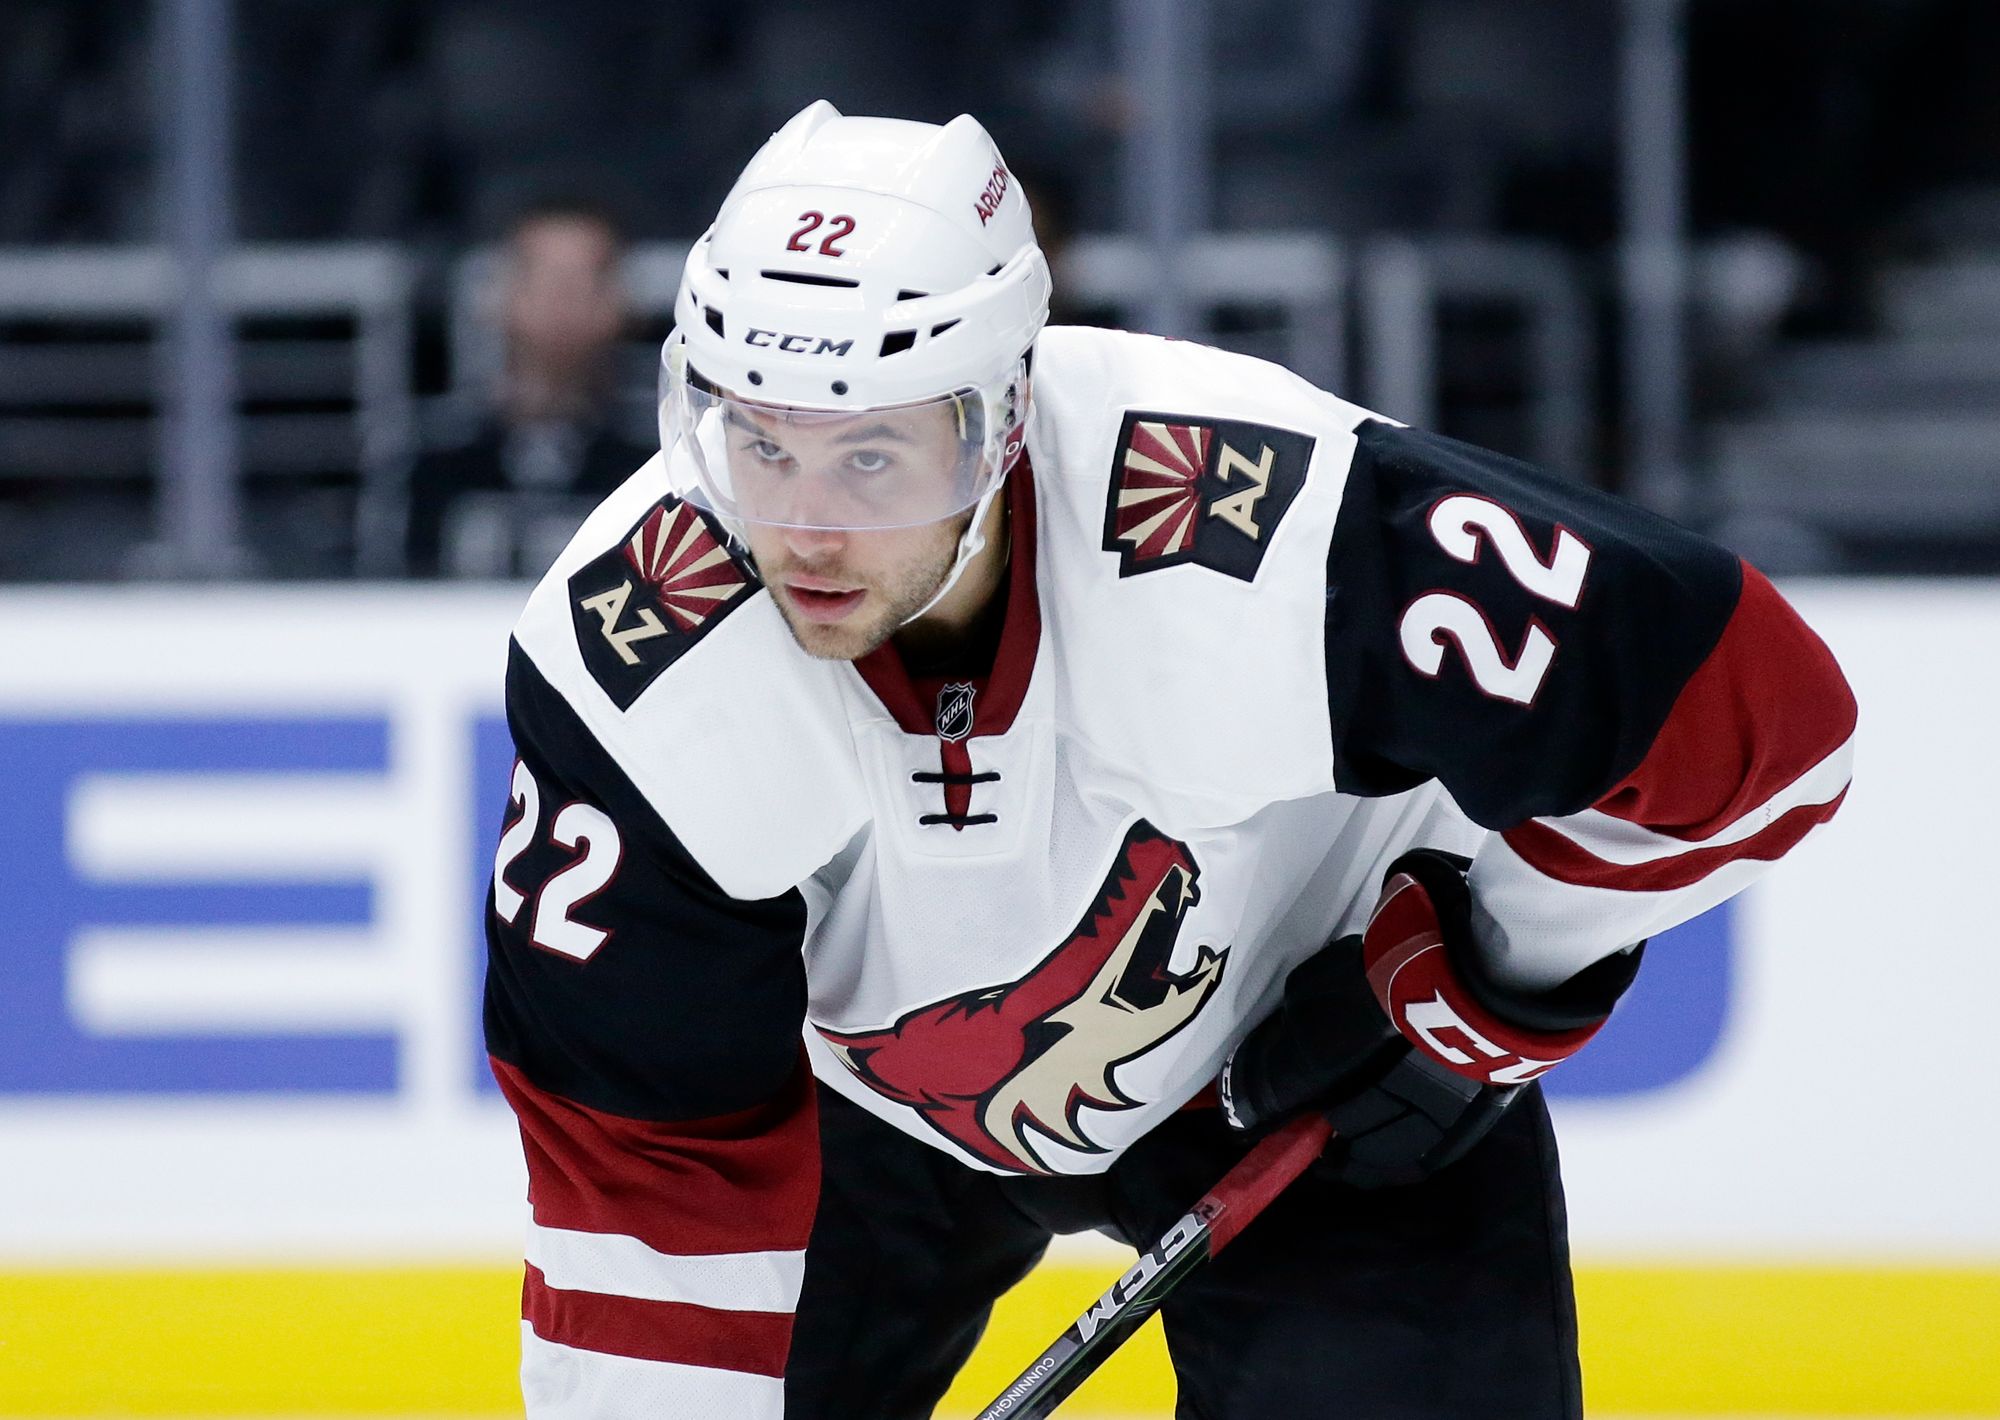 Craig Cunningham would bounced between the AHL Tucson Roadrunners and the NHL Arizona Coyotes.